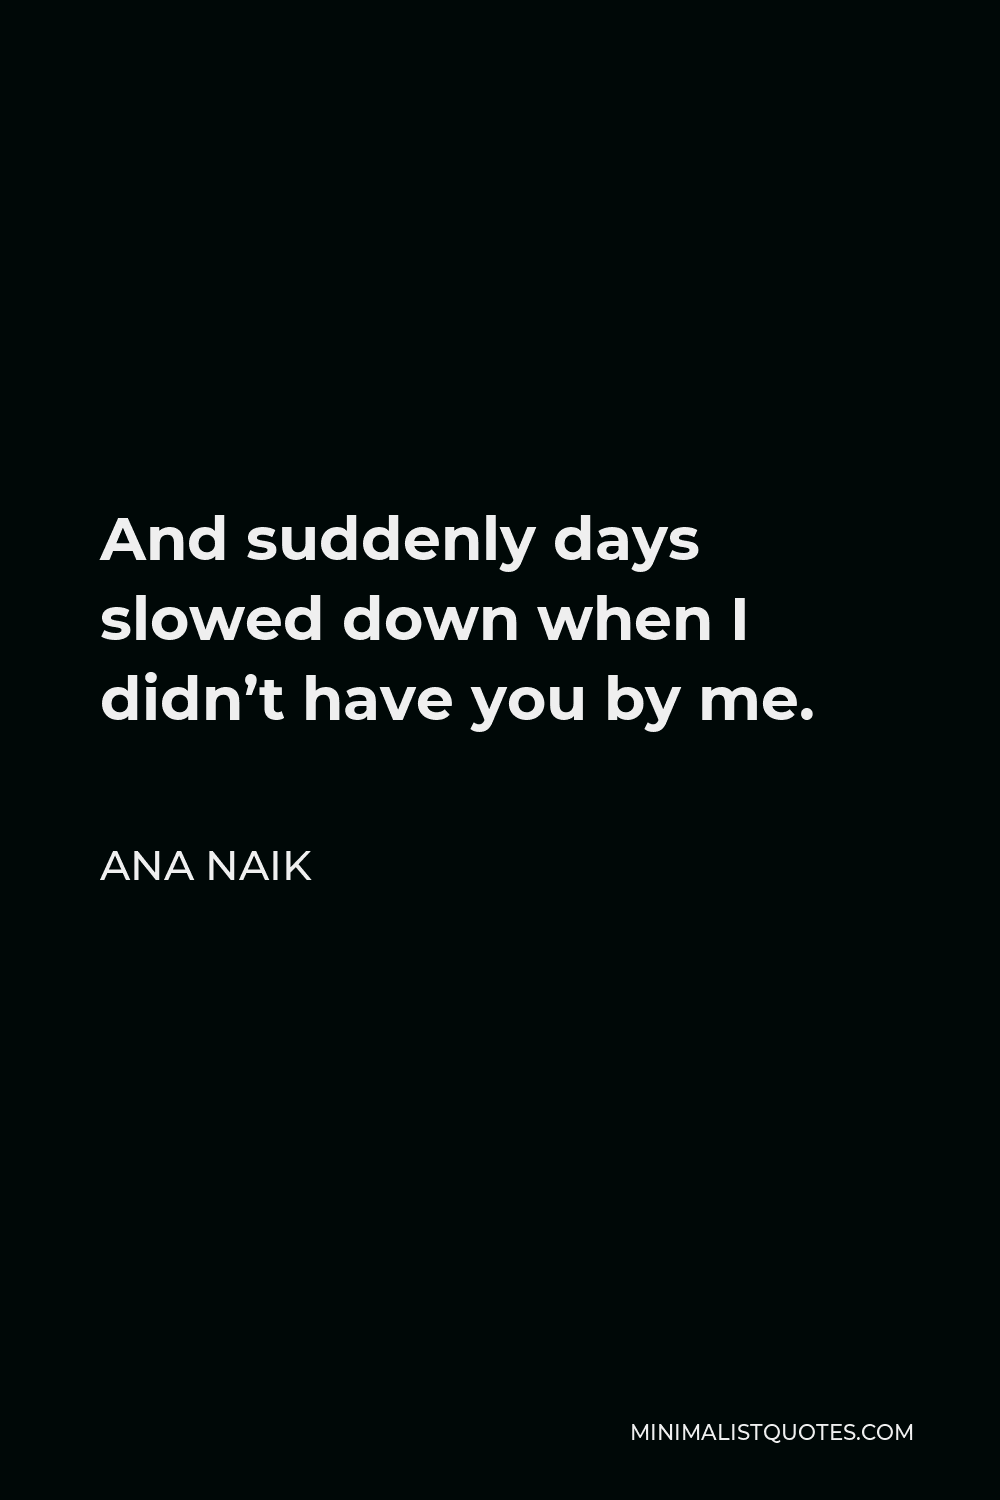 Ana Naik Quote - And suddenly days slowed down when I didn’t have you by me.